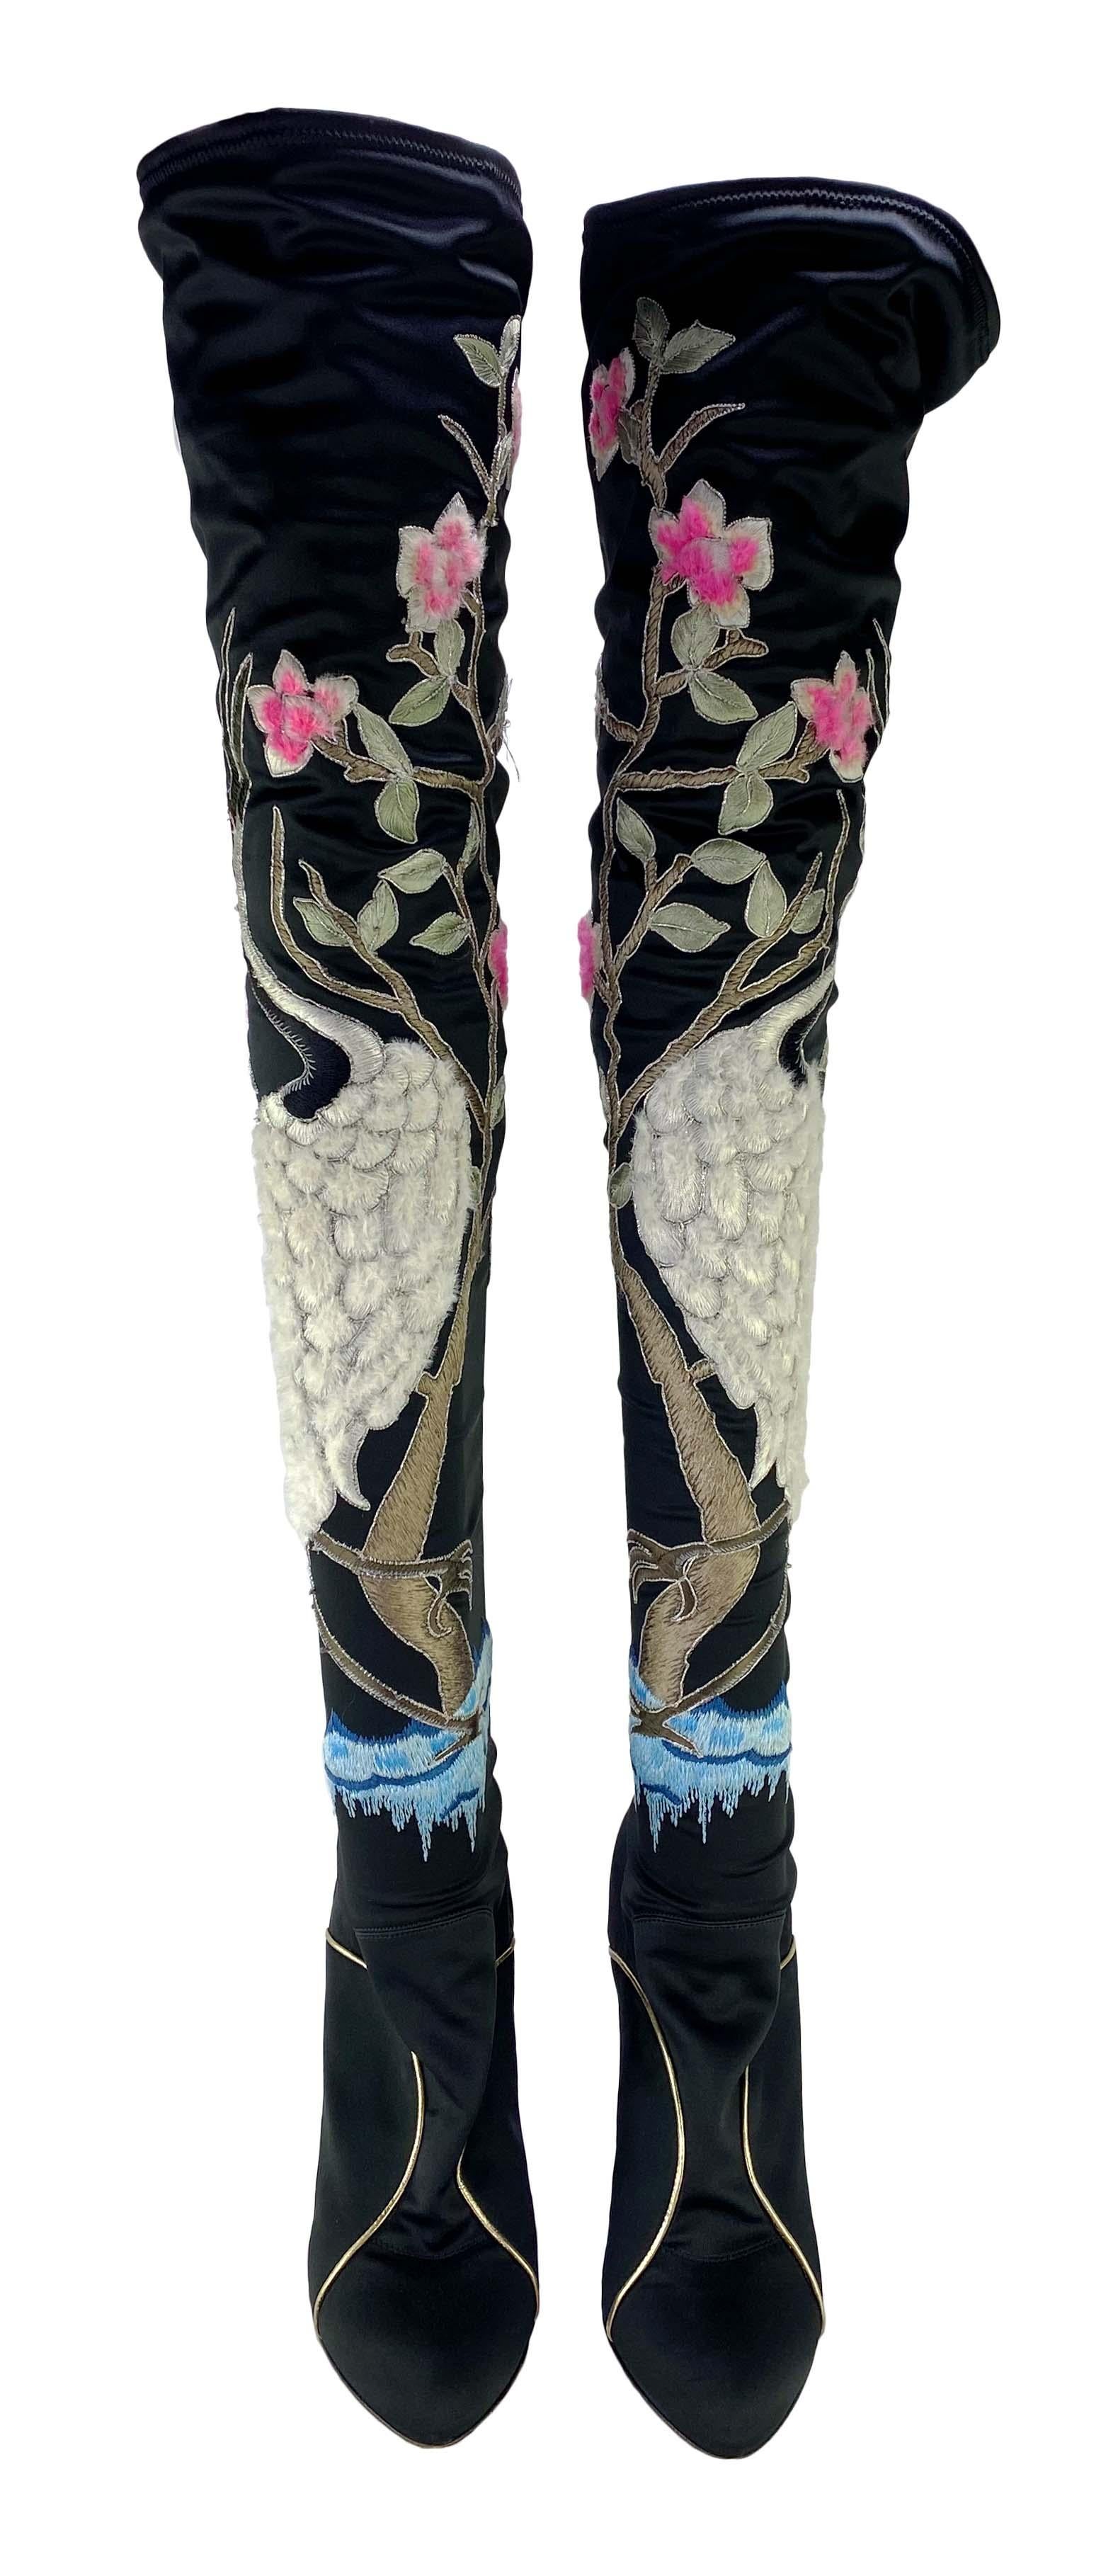 Presenting  a pair of beautifully embroidered Yves Saint Laurent Rive Gauche wedge boots depicting a Chinese crane, designed by Tom Ford. These boots are a part of the Fall/Winter 2004 collection and debuted on the runway on look number 20 modeled